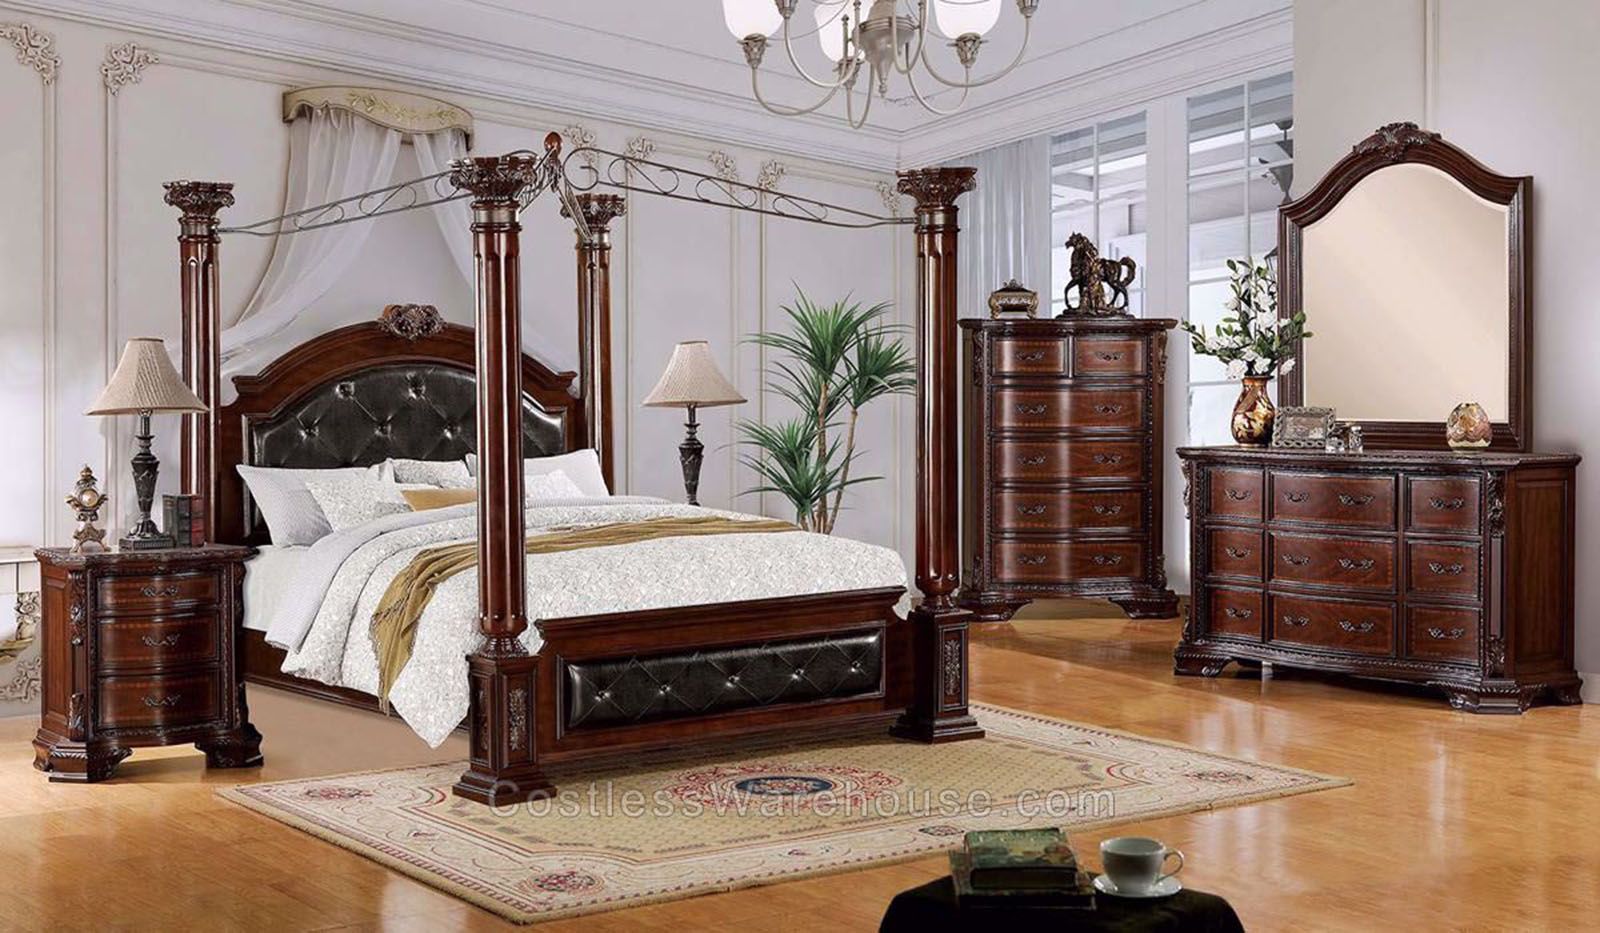 Furniture Of America Mandalaymonte Vista I 4pc Poster Canopy Bedroom Set In Brown Cherry within measurements 1600 X 933